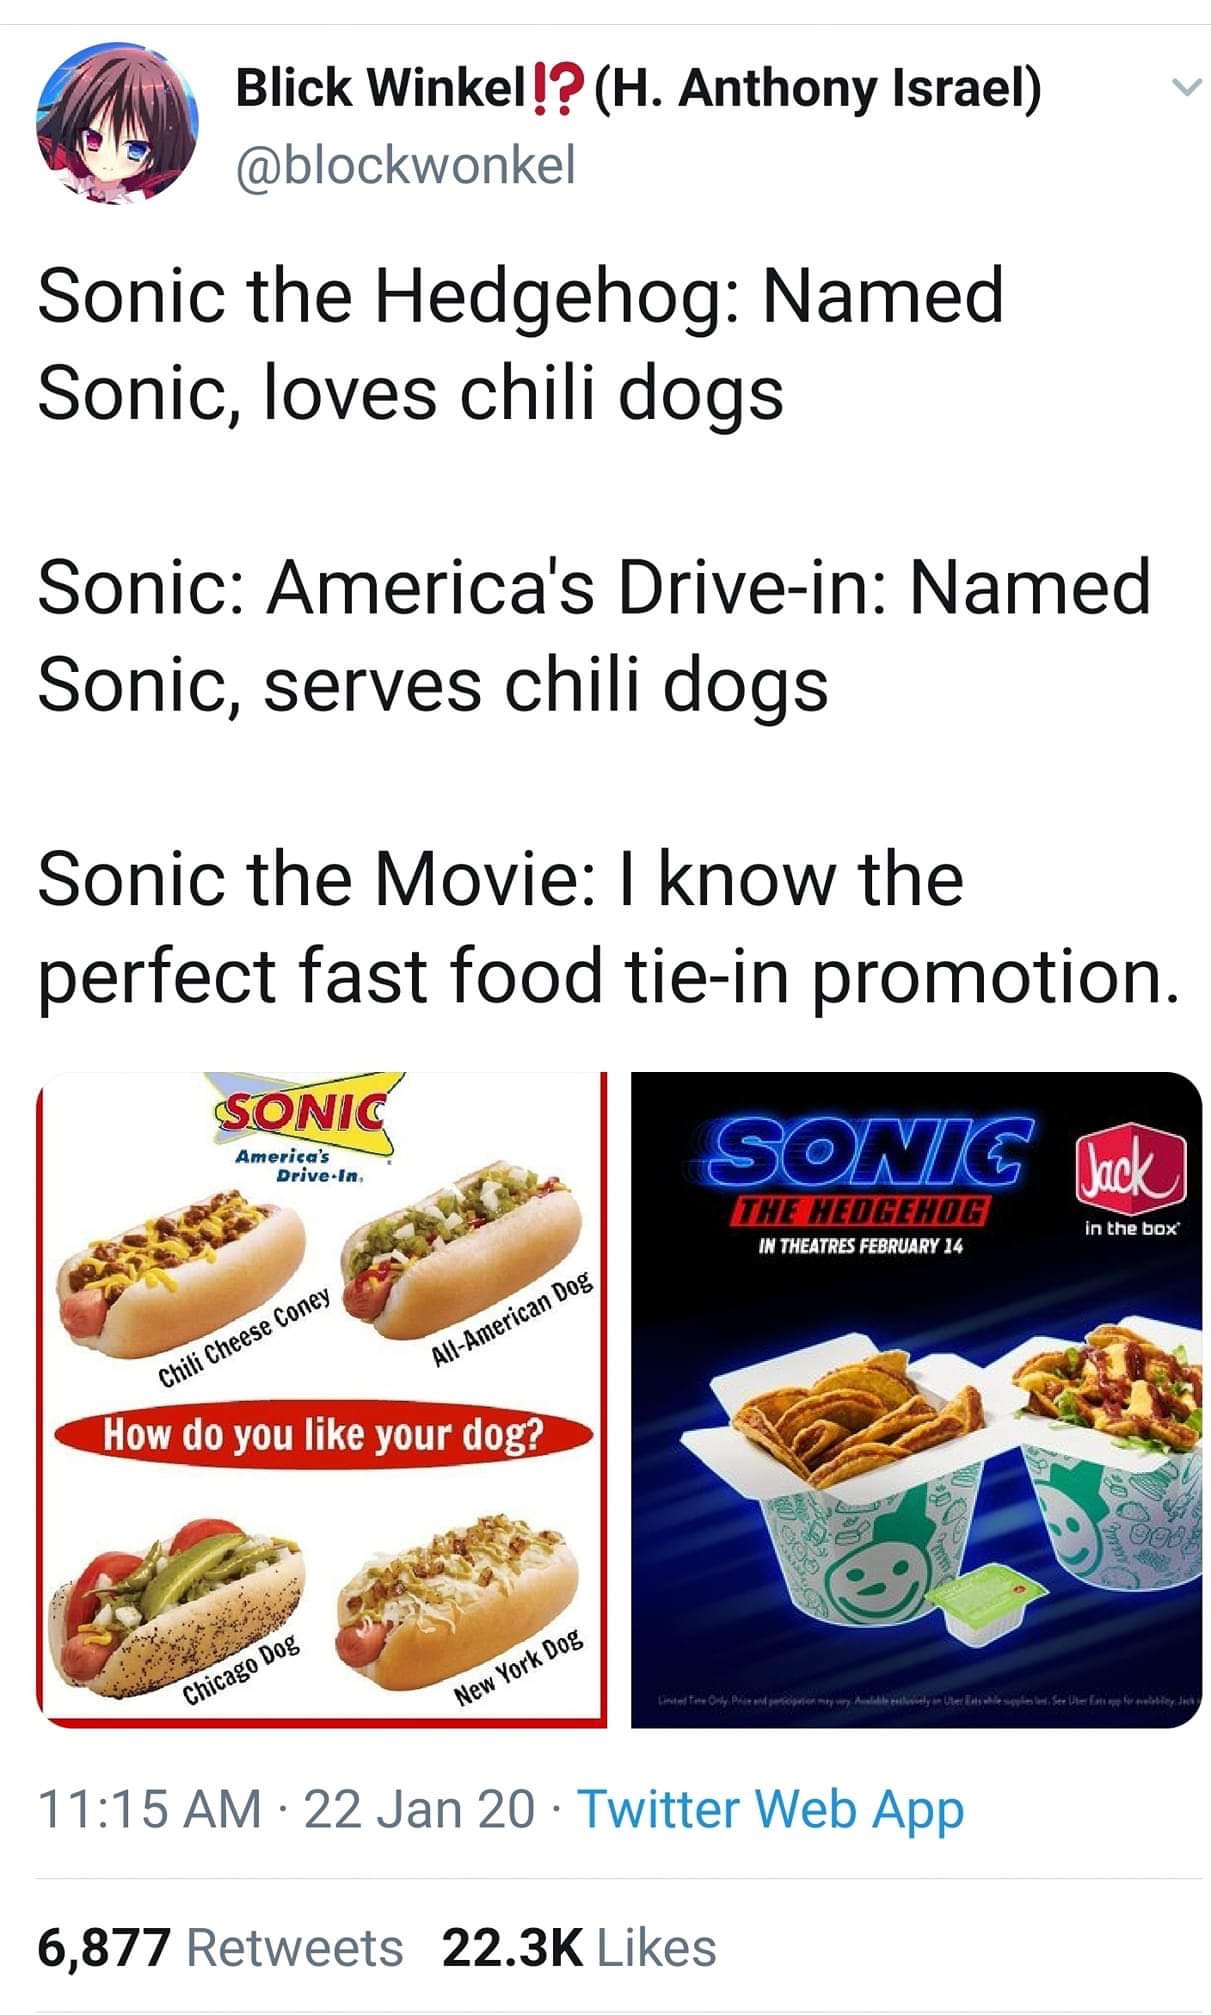 fast food - a Blick Winkel!? H. Anthony Israel Sonic the Hedgehog Named Sonic, loves chili dogs Sonic America's Drivein Named Sonic, serves chili dogs Sonic the Movie I know the perfect fast food tiein promotion. Sonic Sonic Jack America's DriveIn The Hed